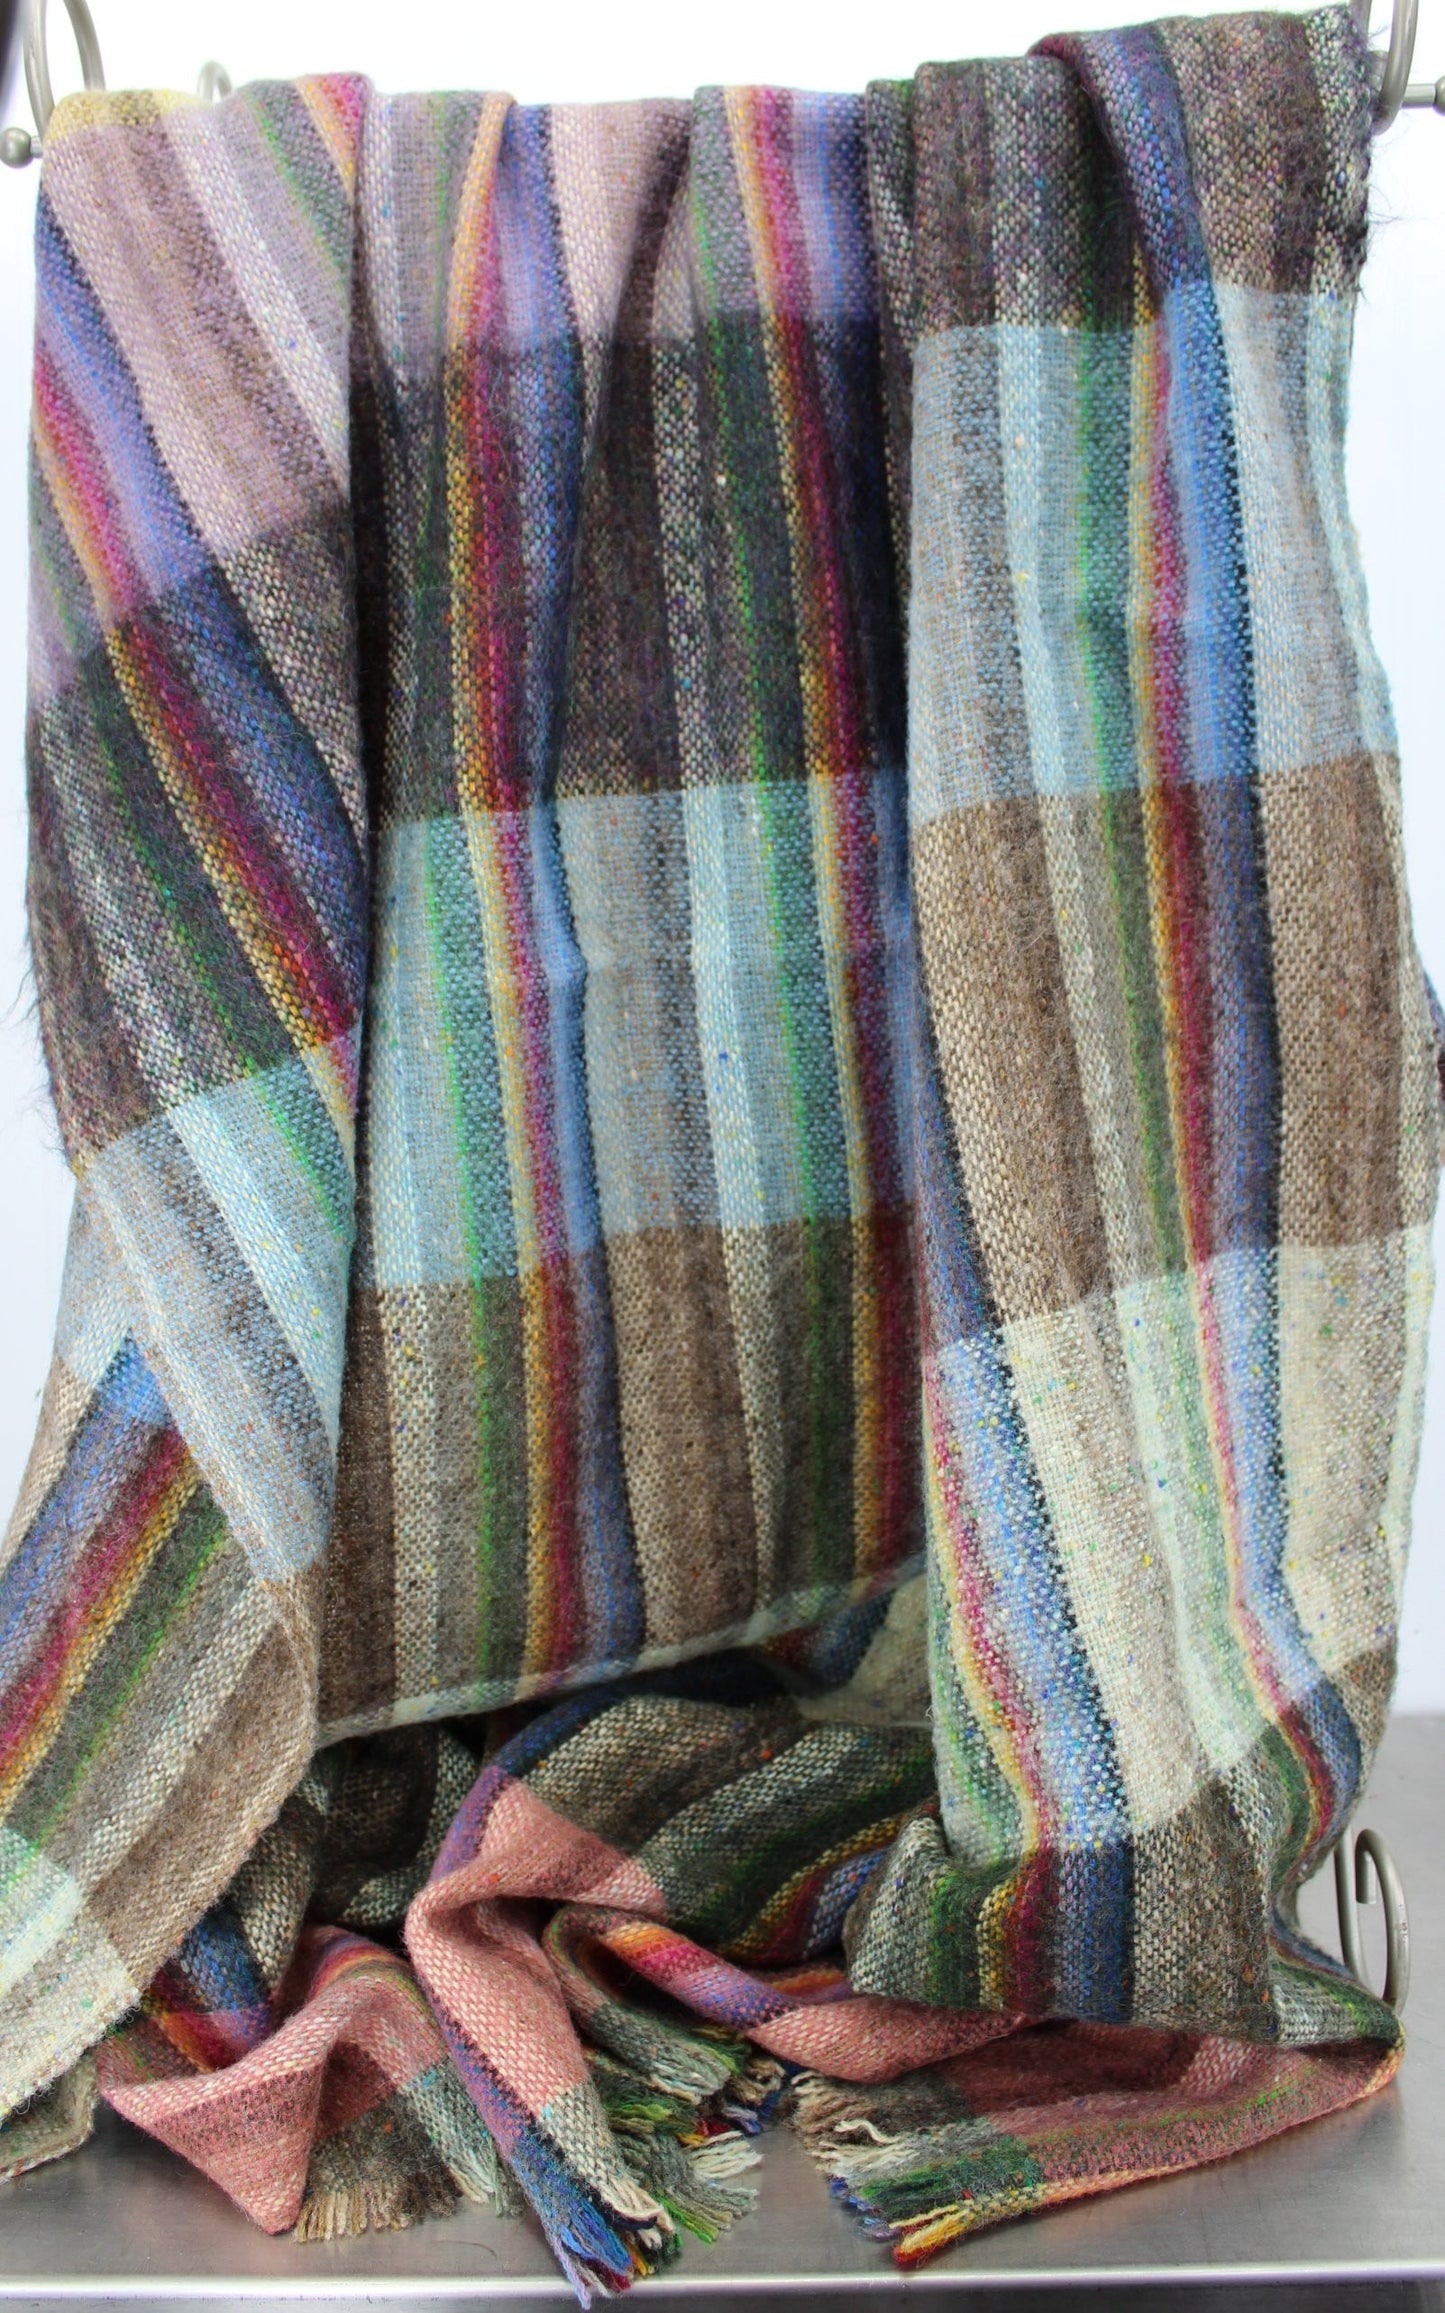 Donegal Handwoven Tweed John Molloy Throw Blanket - Lambswool Fringed Awesome all colors